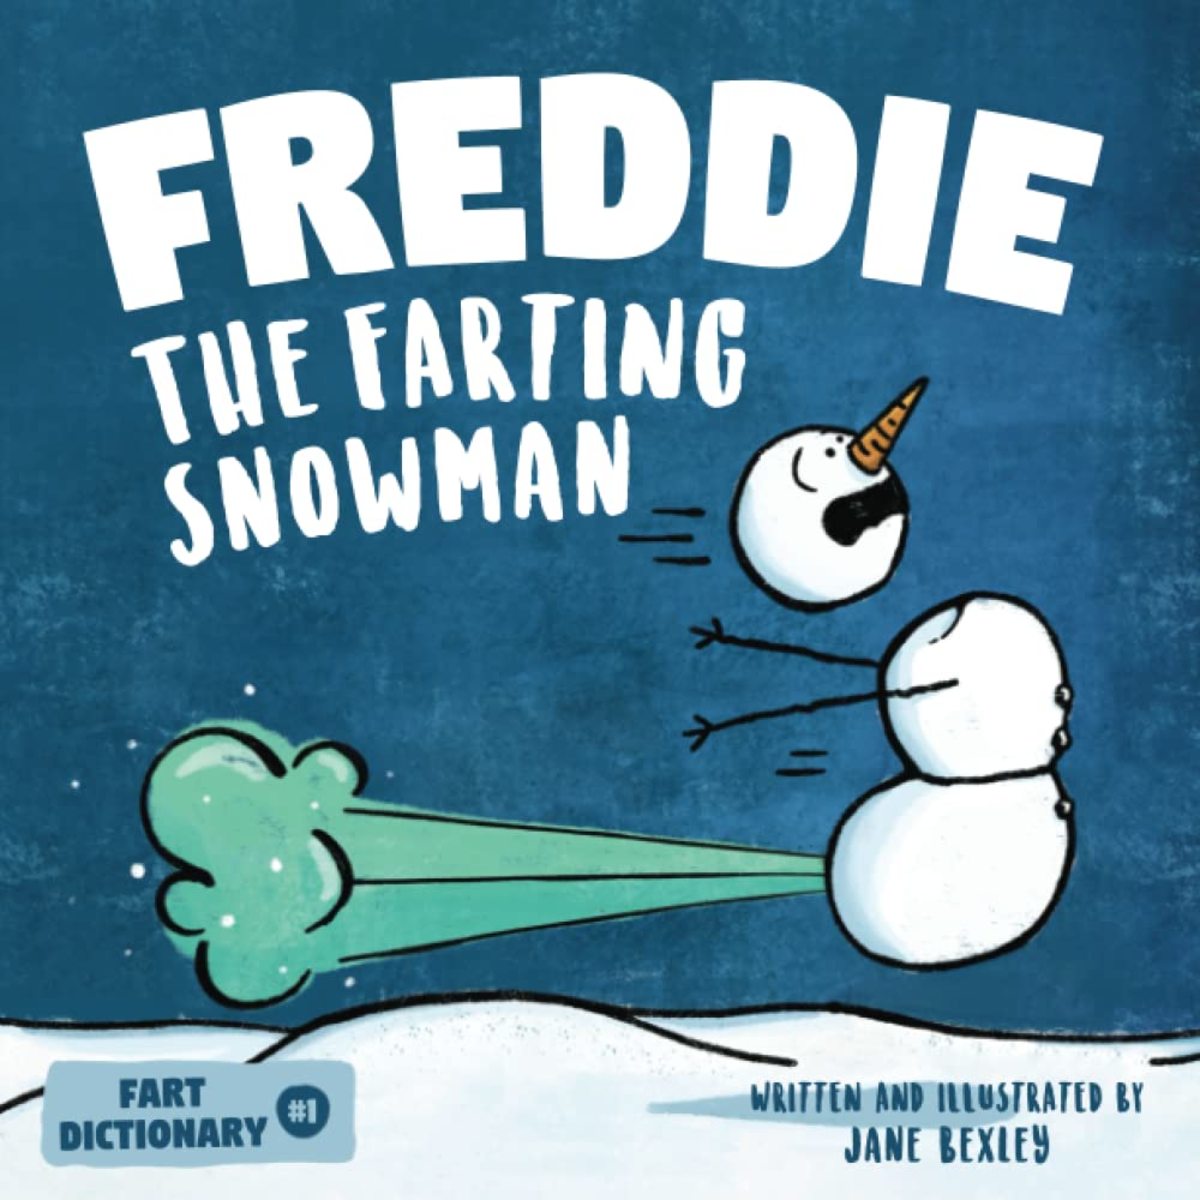 Freddy the Farting Snowman, because your significant other said you couldn't buy it.